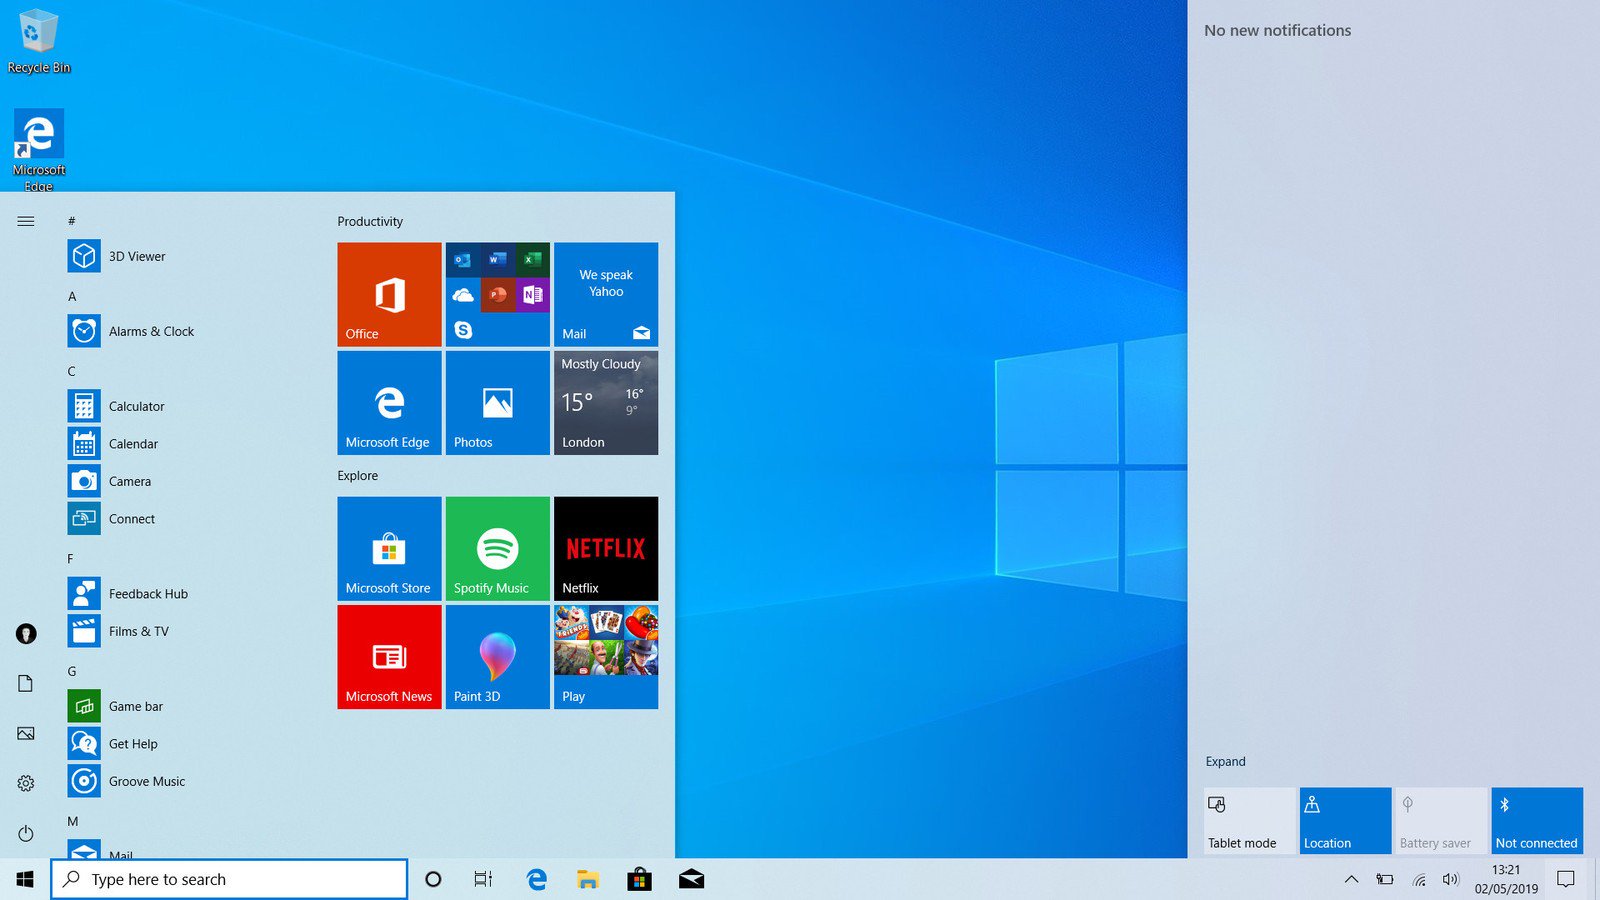 purchase windows 10 pro download